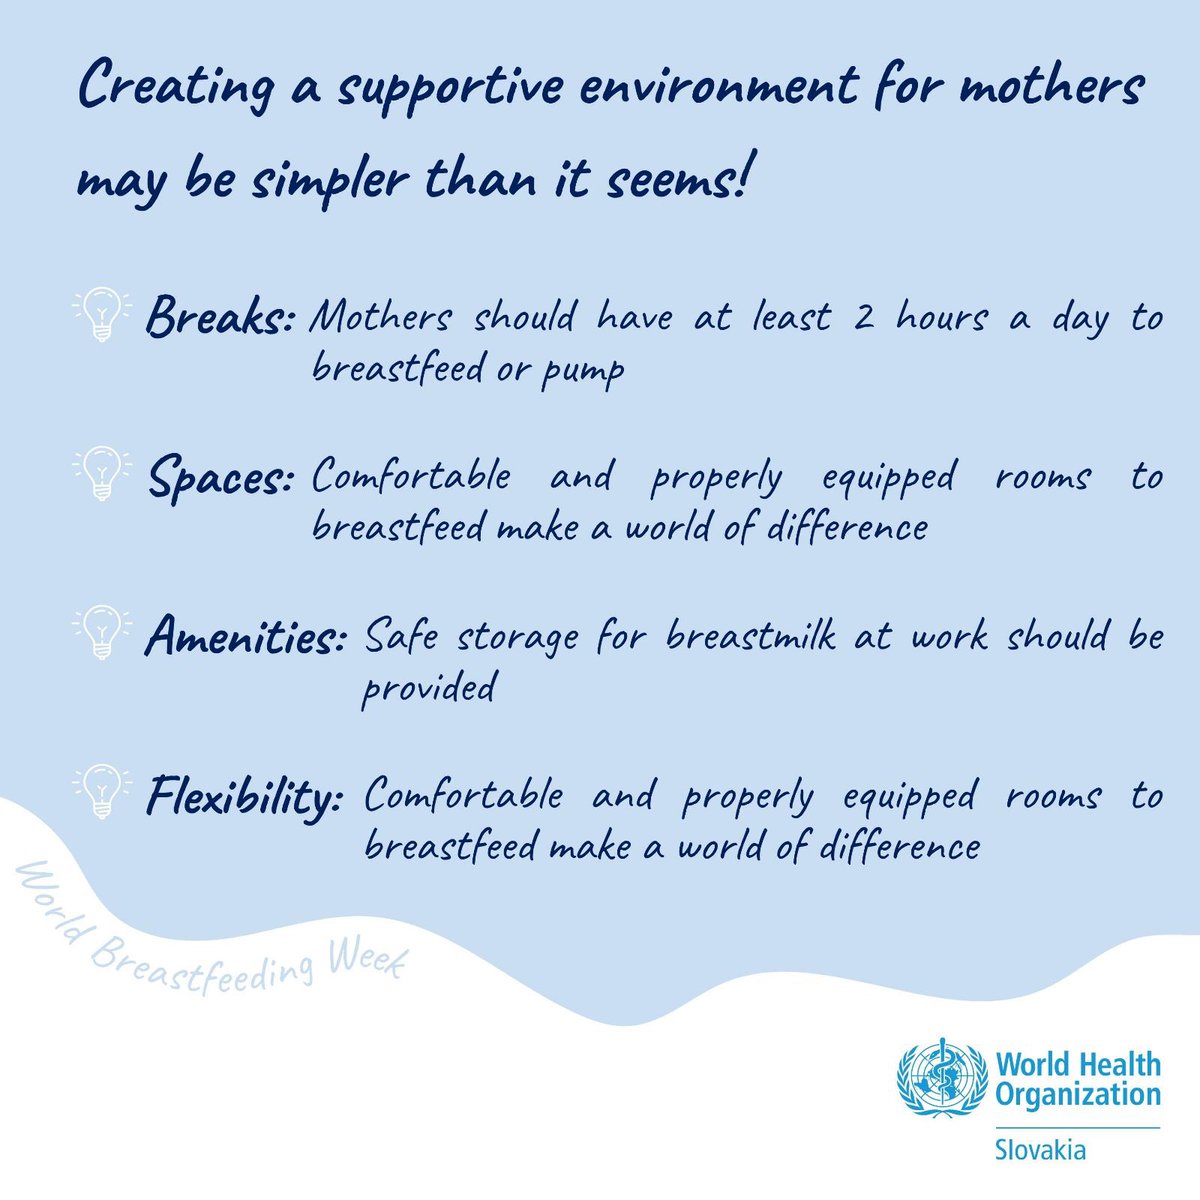 What makes a #BreastfeedingFriendly workplace❓Breaks to breastfeed or pump, comfortable spaces equipped for breastfeeding, safe storage for breastmilk, and flexible work-from-home options ✅
Lead @WHO recommendations and stay healthy!